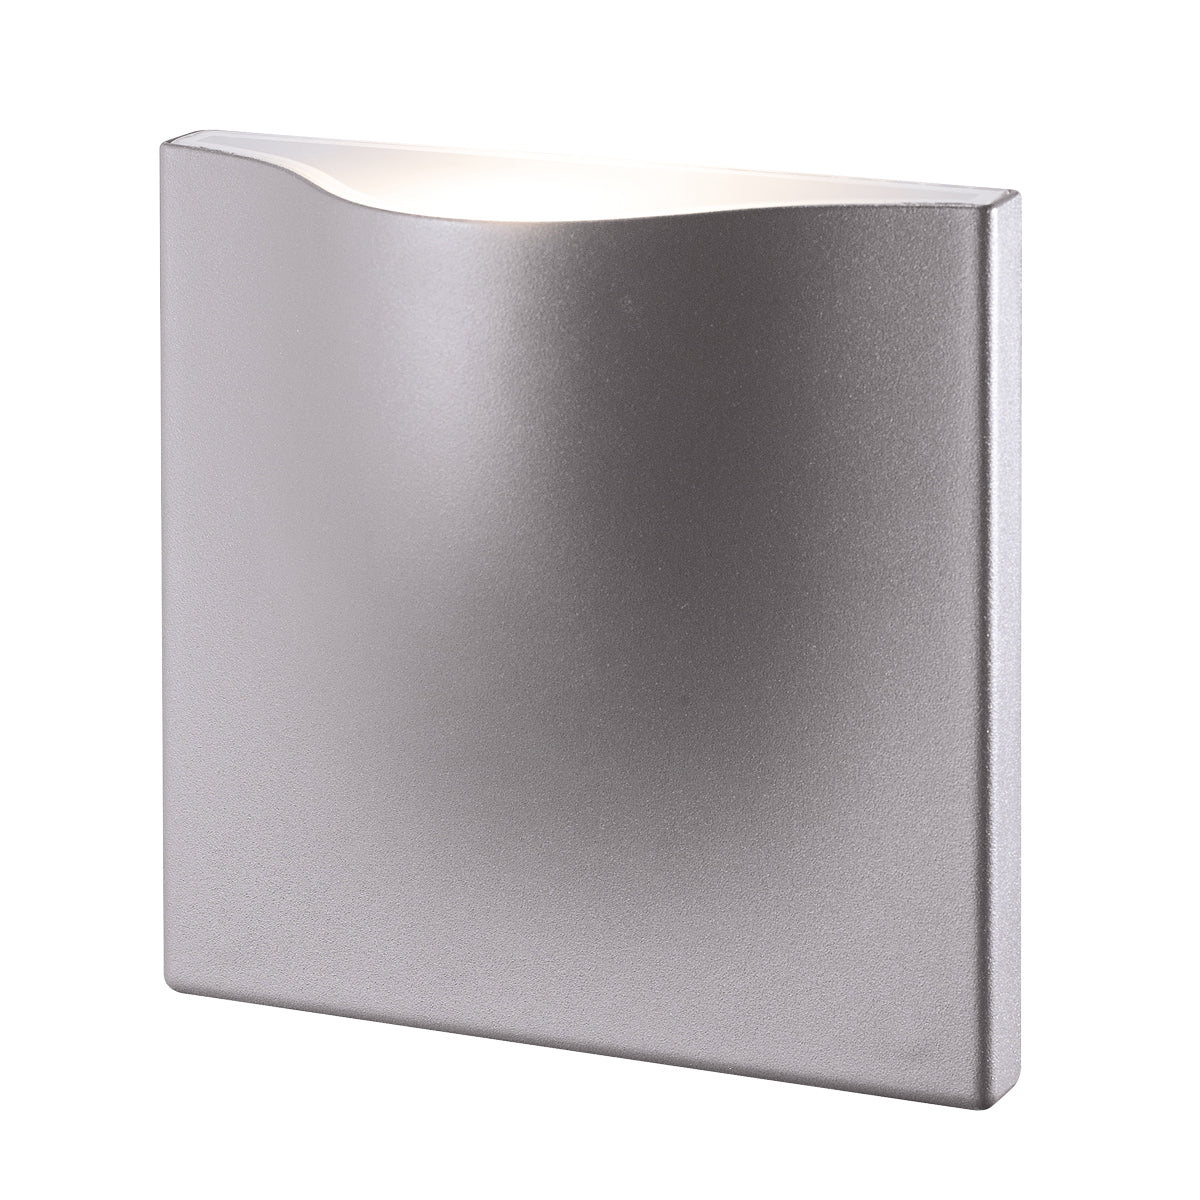 HAVEN Outdoor sconce Aluminum - 28277-019 INTEGRATED LED | EUROFASE